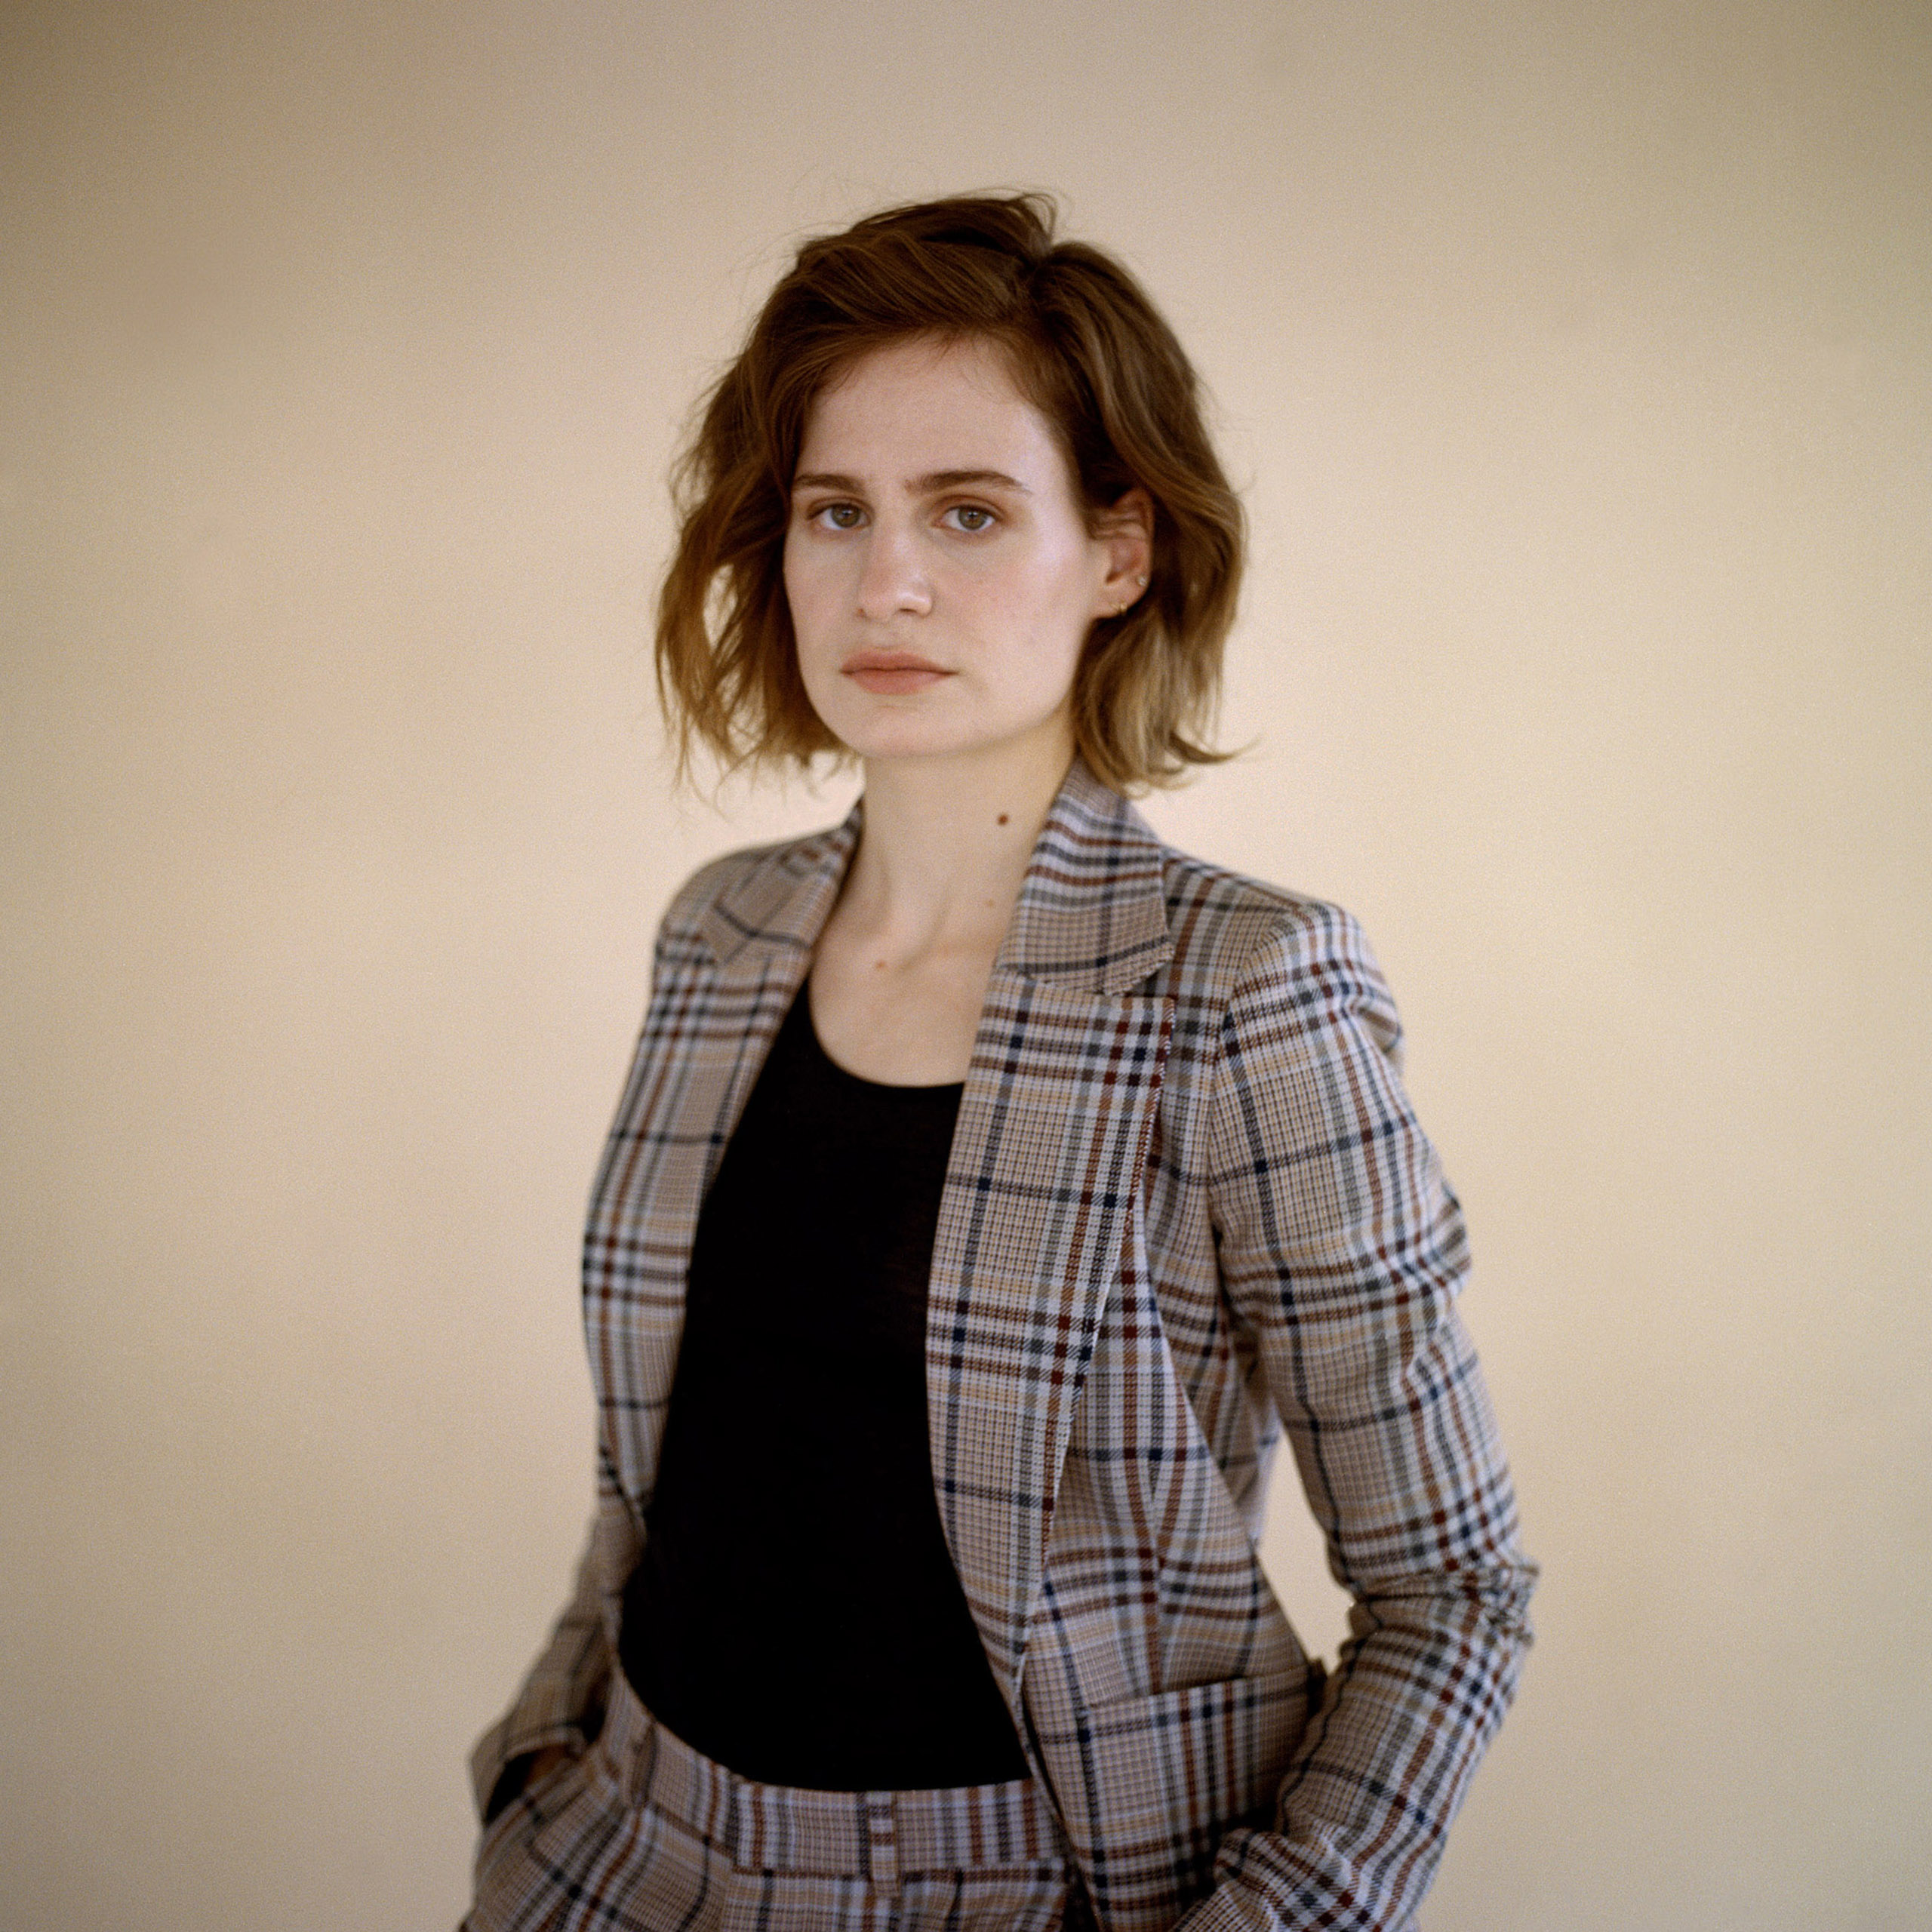 French singer Héloïse Letissier, a solo artist who performs as Christine and the Queens photographed in London, UK. Sept. 12, 2016. (Laura Pannack for TIME)